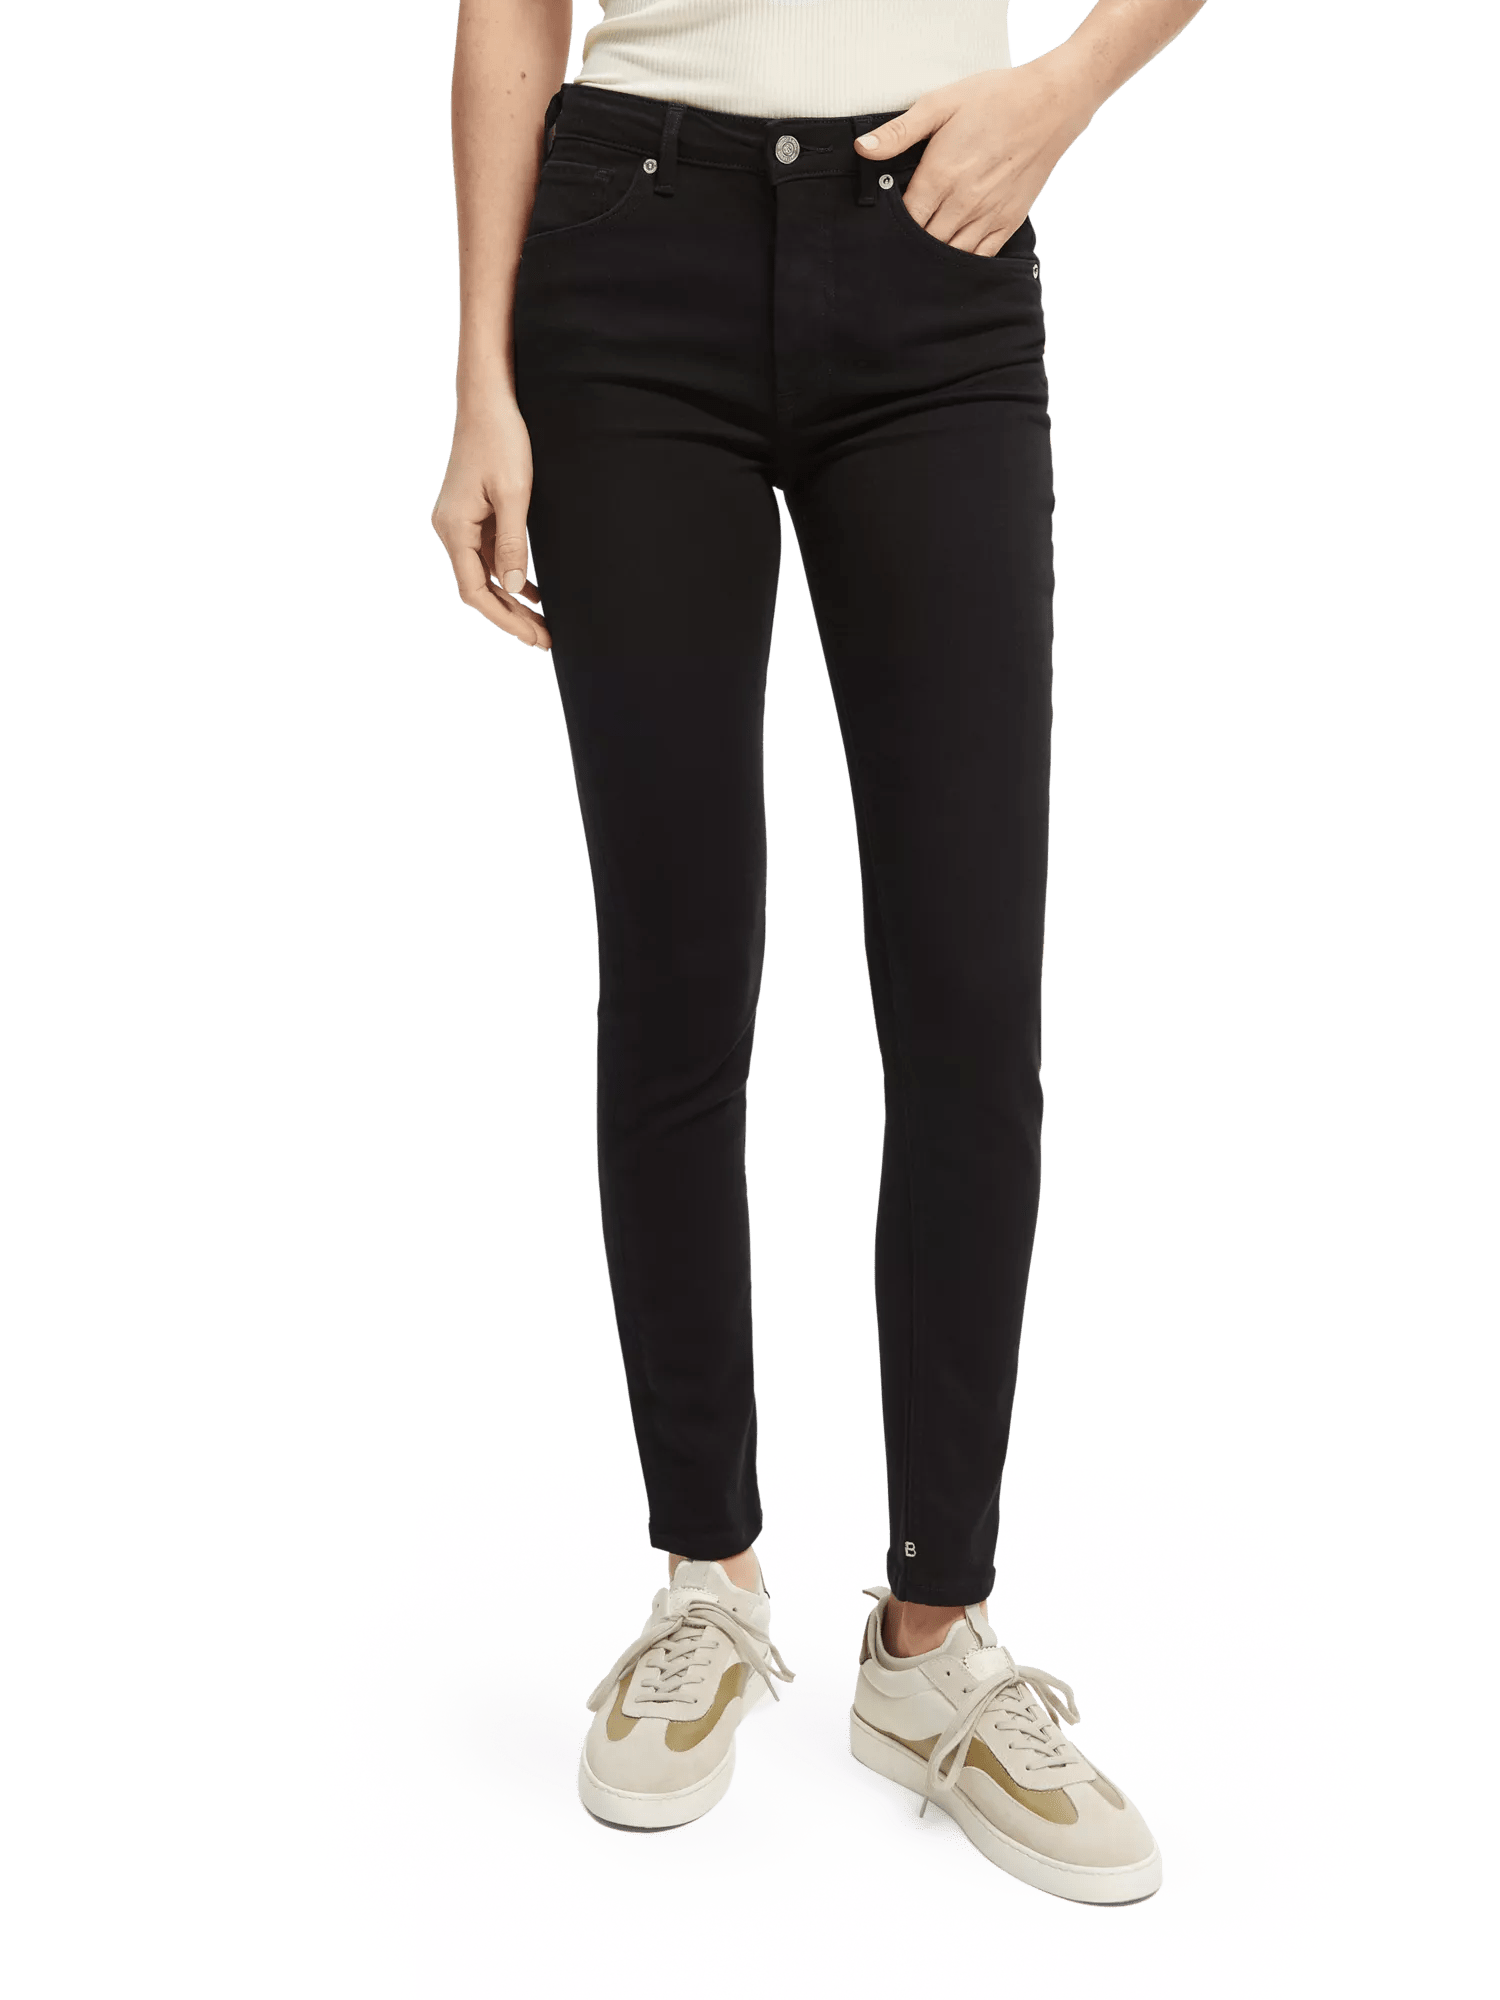 The Haut highrise skinny jeans